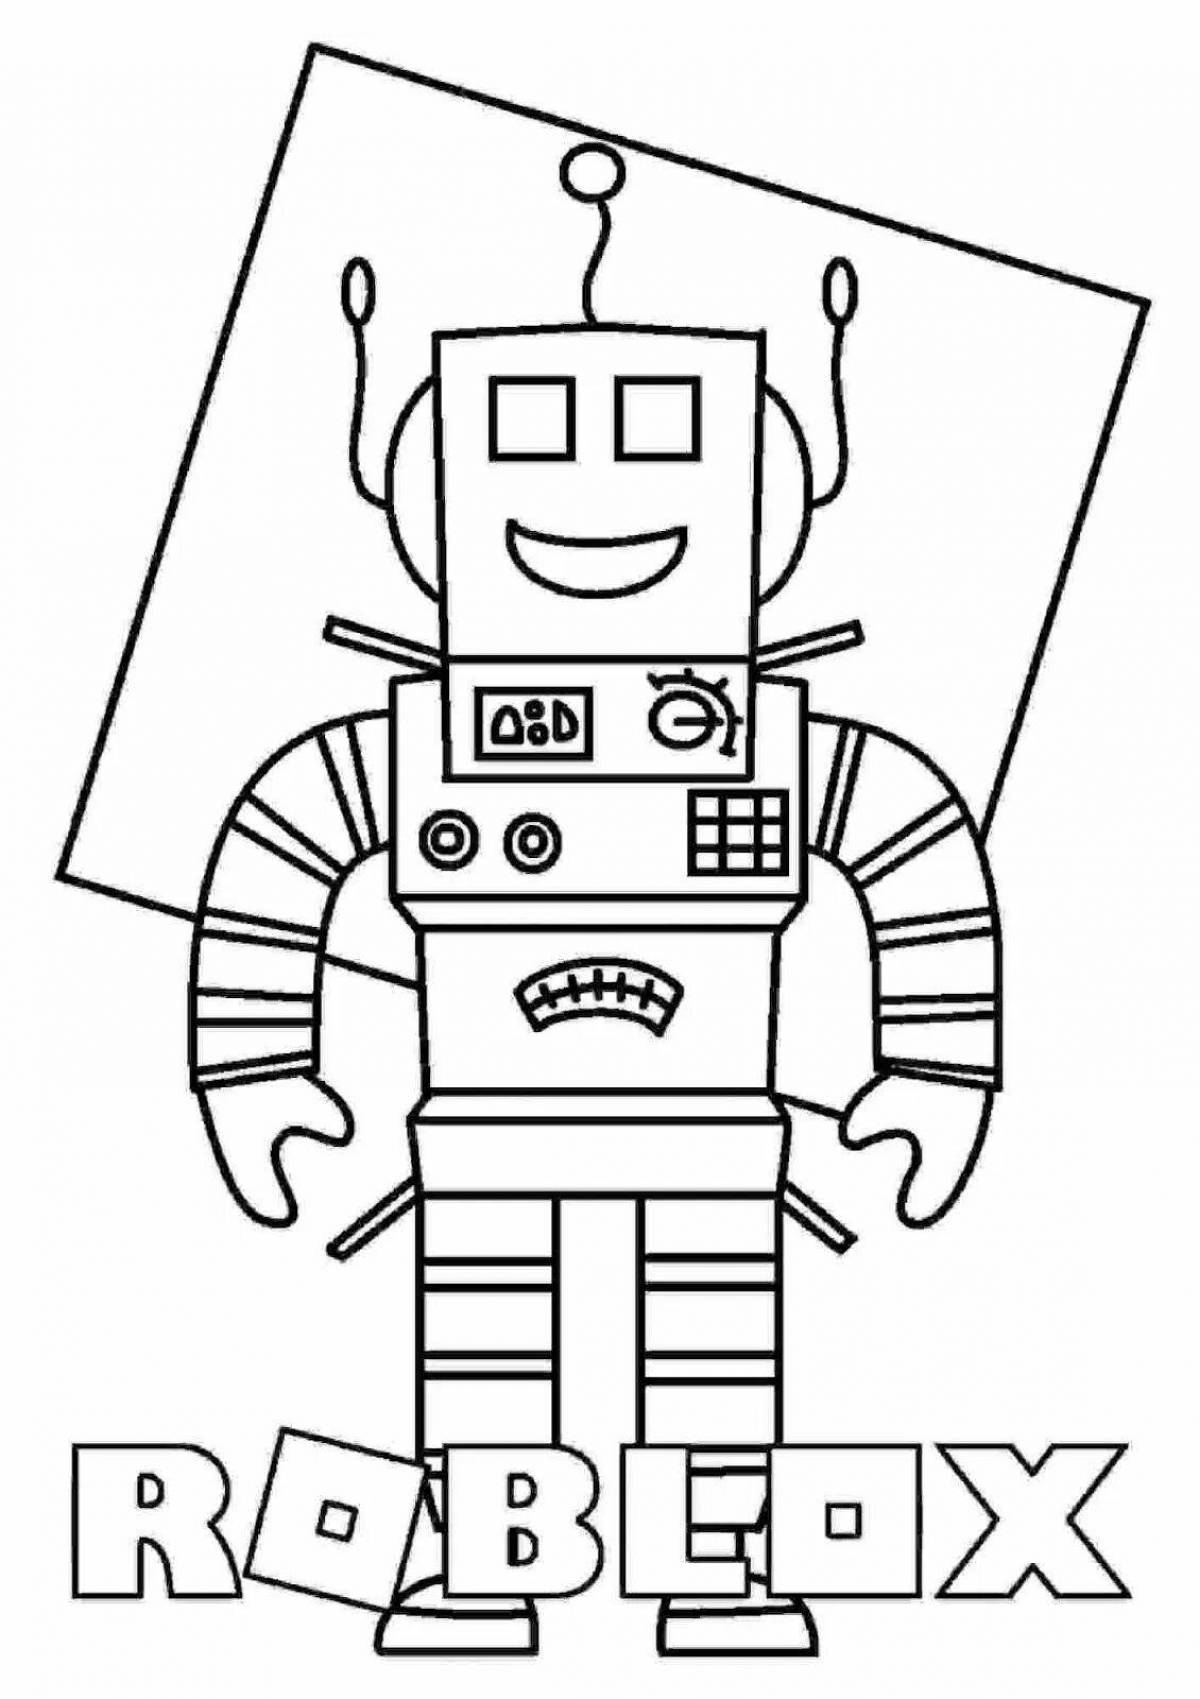 Amazing roblox 100 doors coloring page